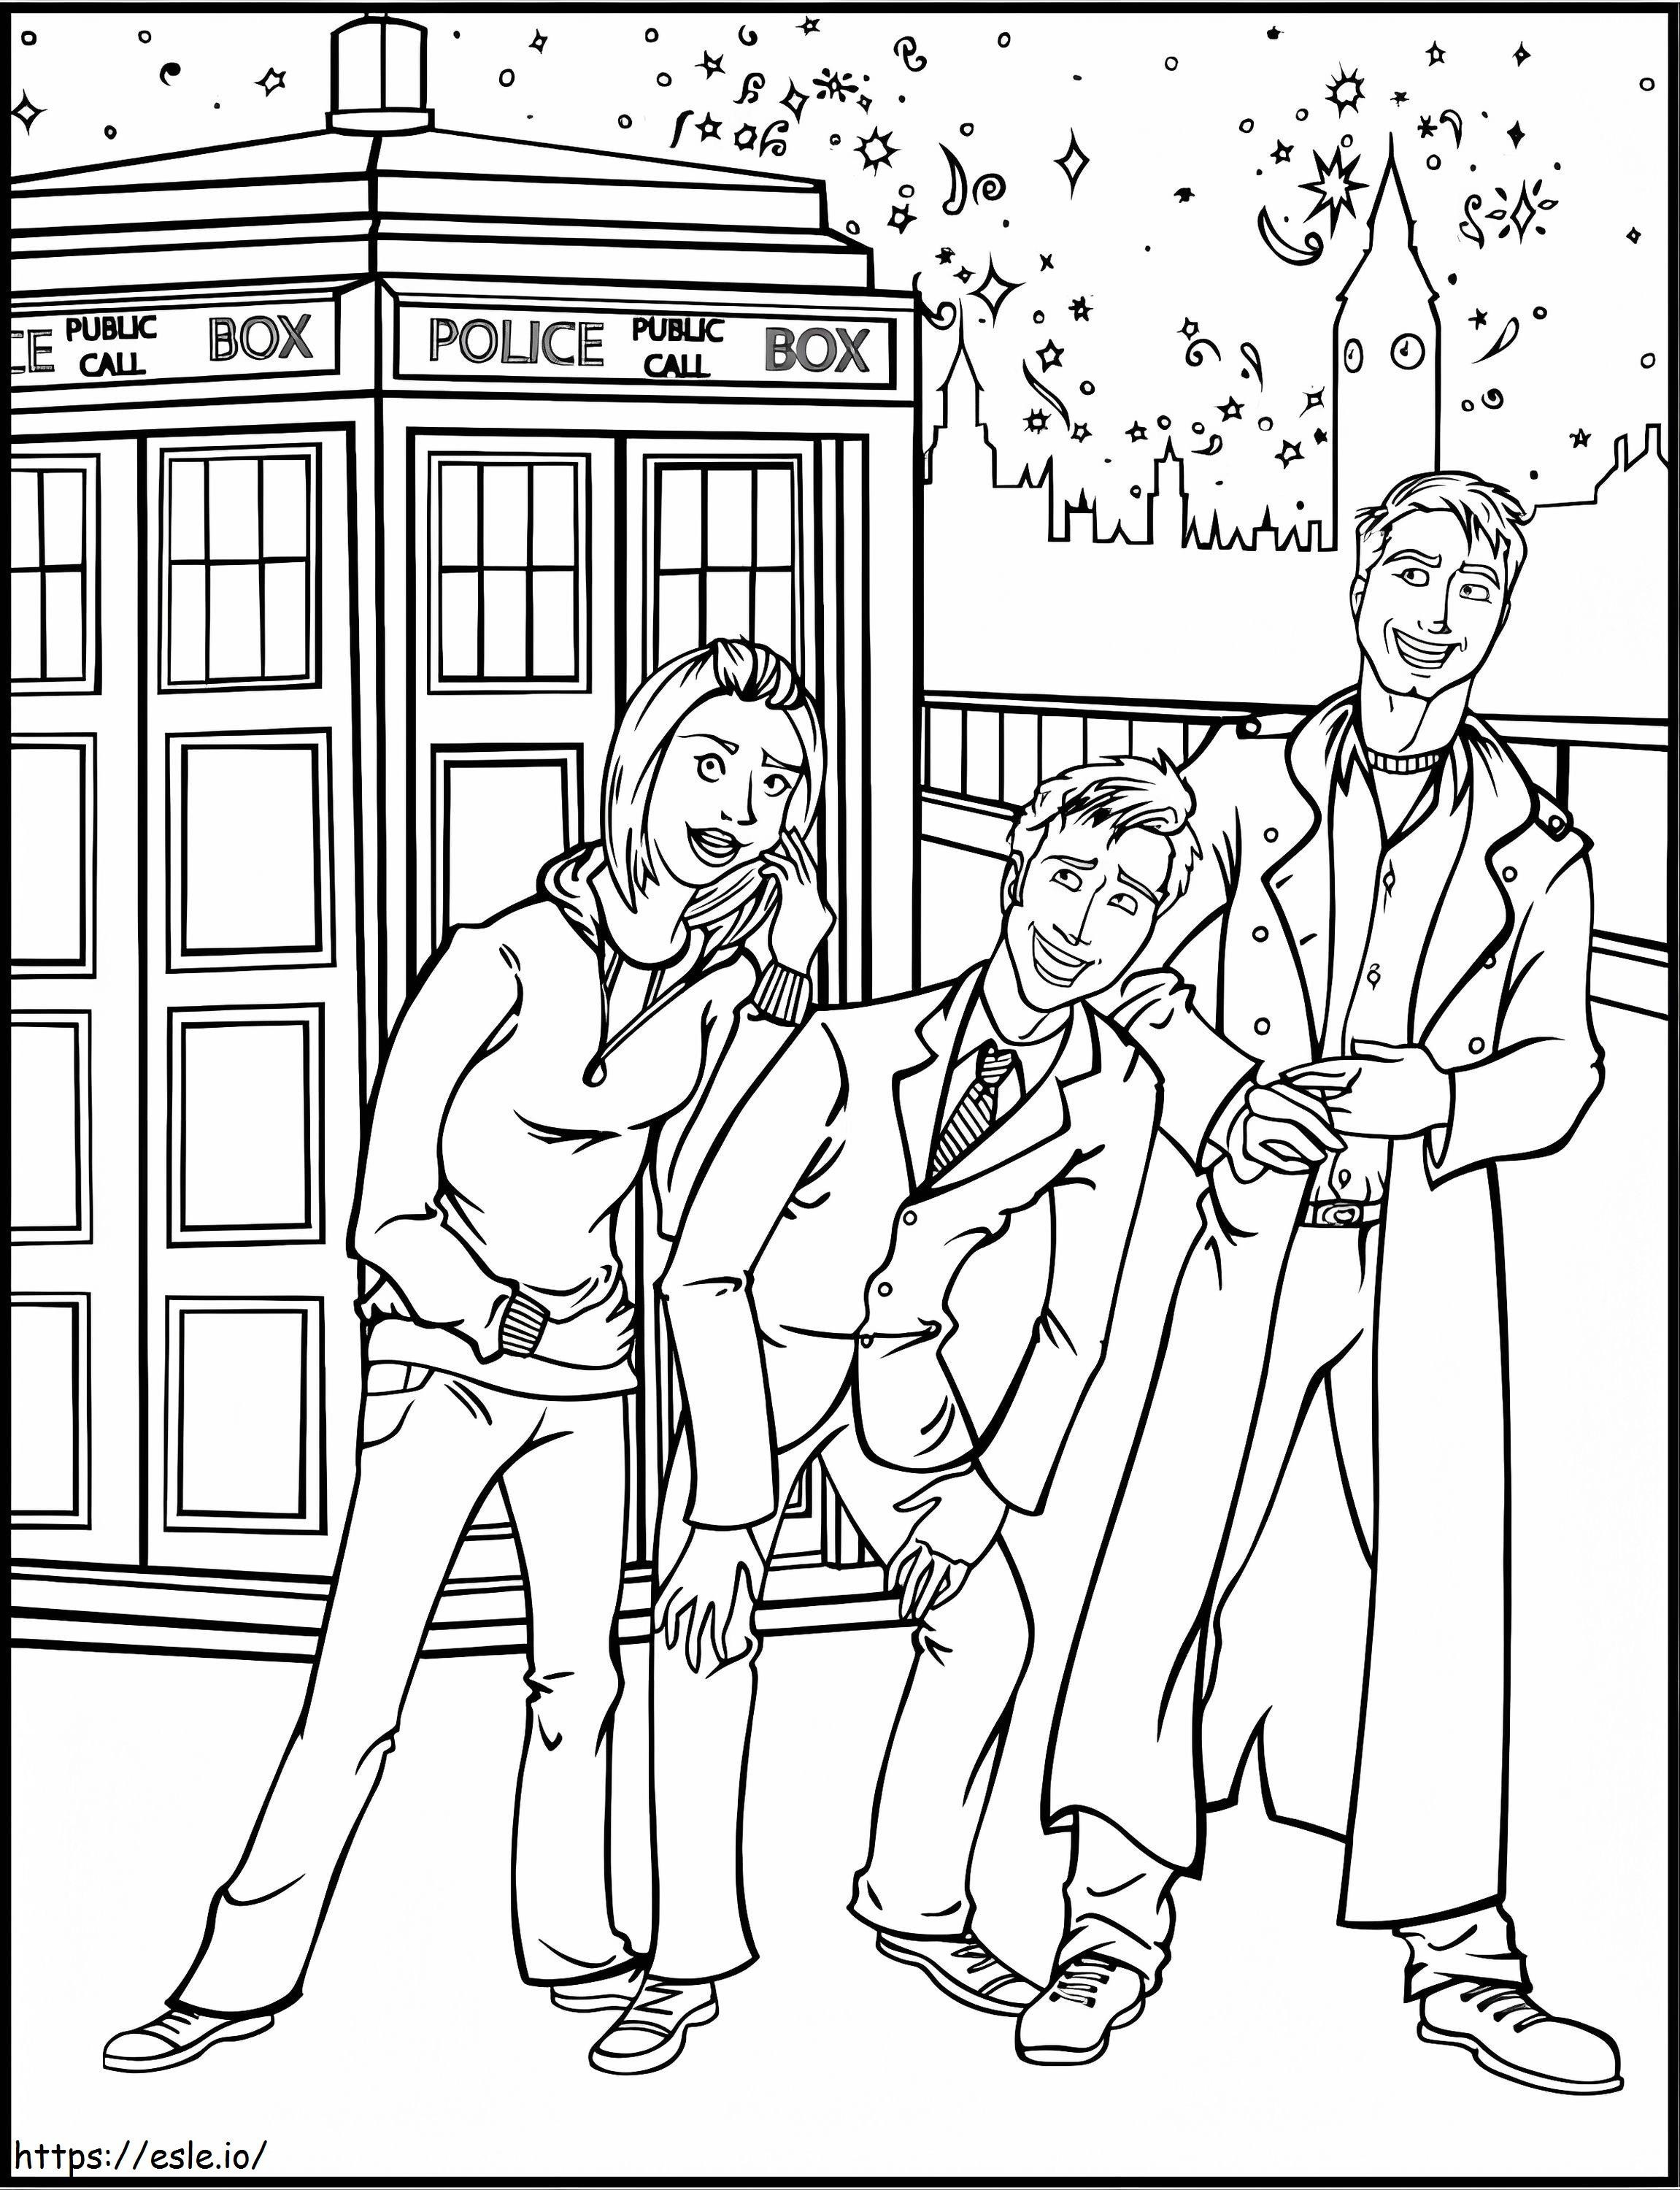 Fun Doctor Who coloring page